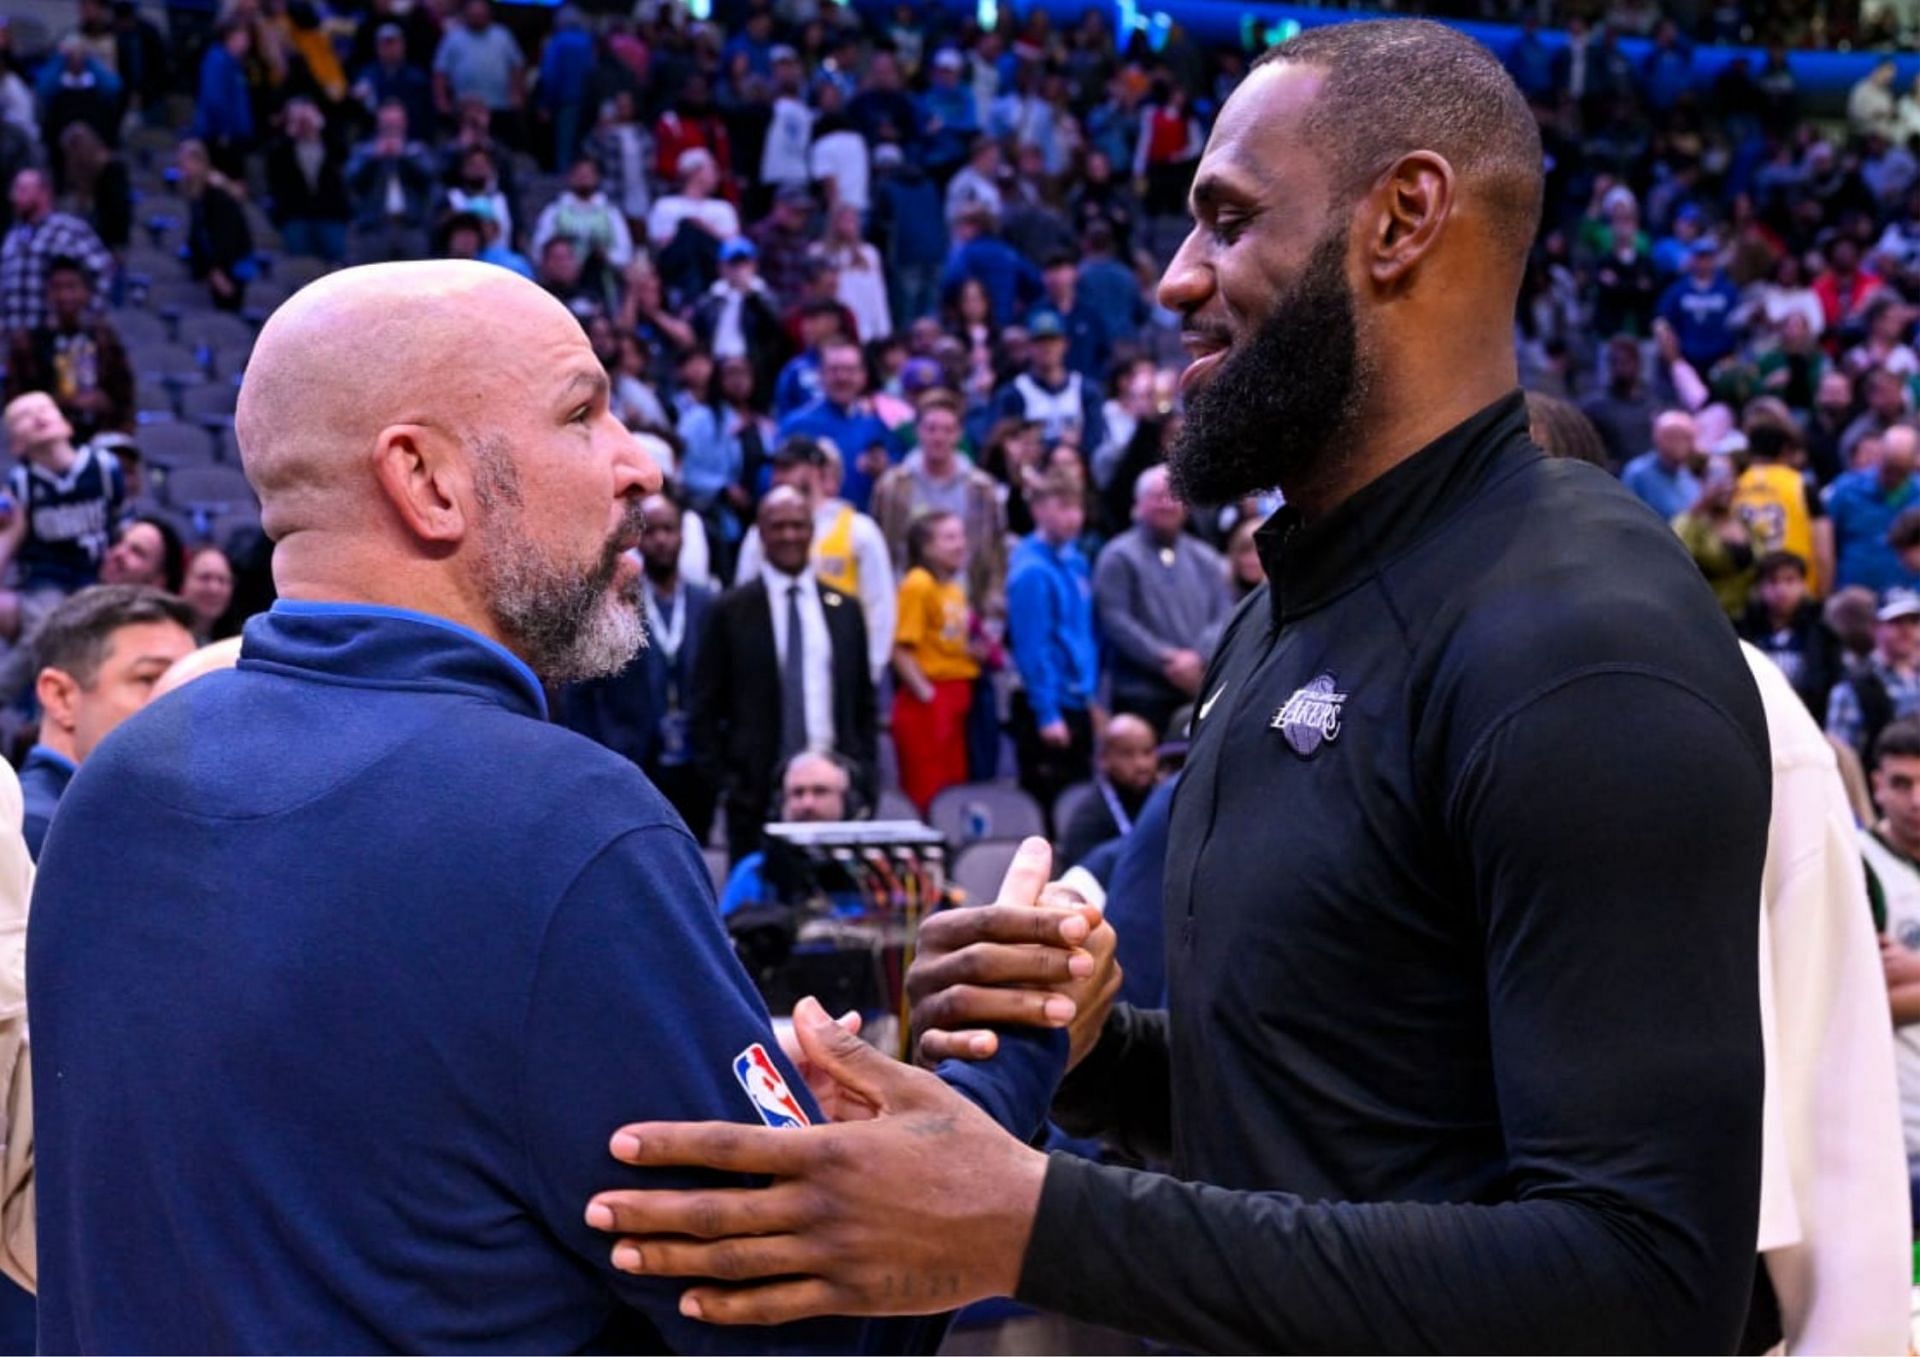 LeBron James is tied with current Dallas Mavericks head coach Jason Kidd with 107 triple-doubles, the fourth-most in NBA history.